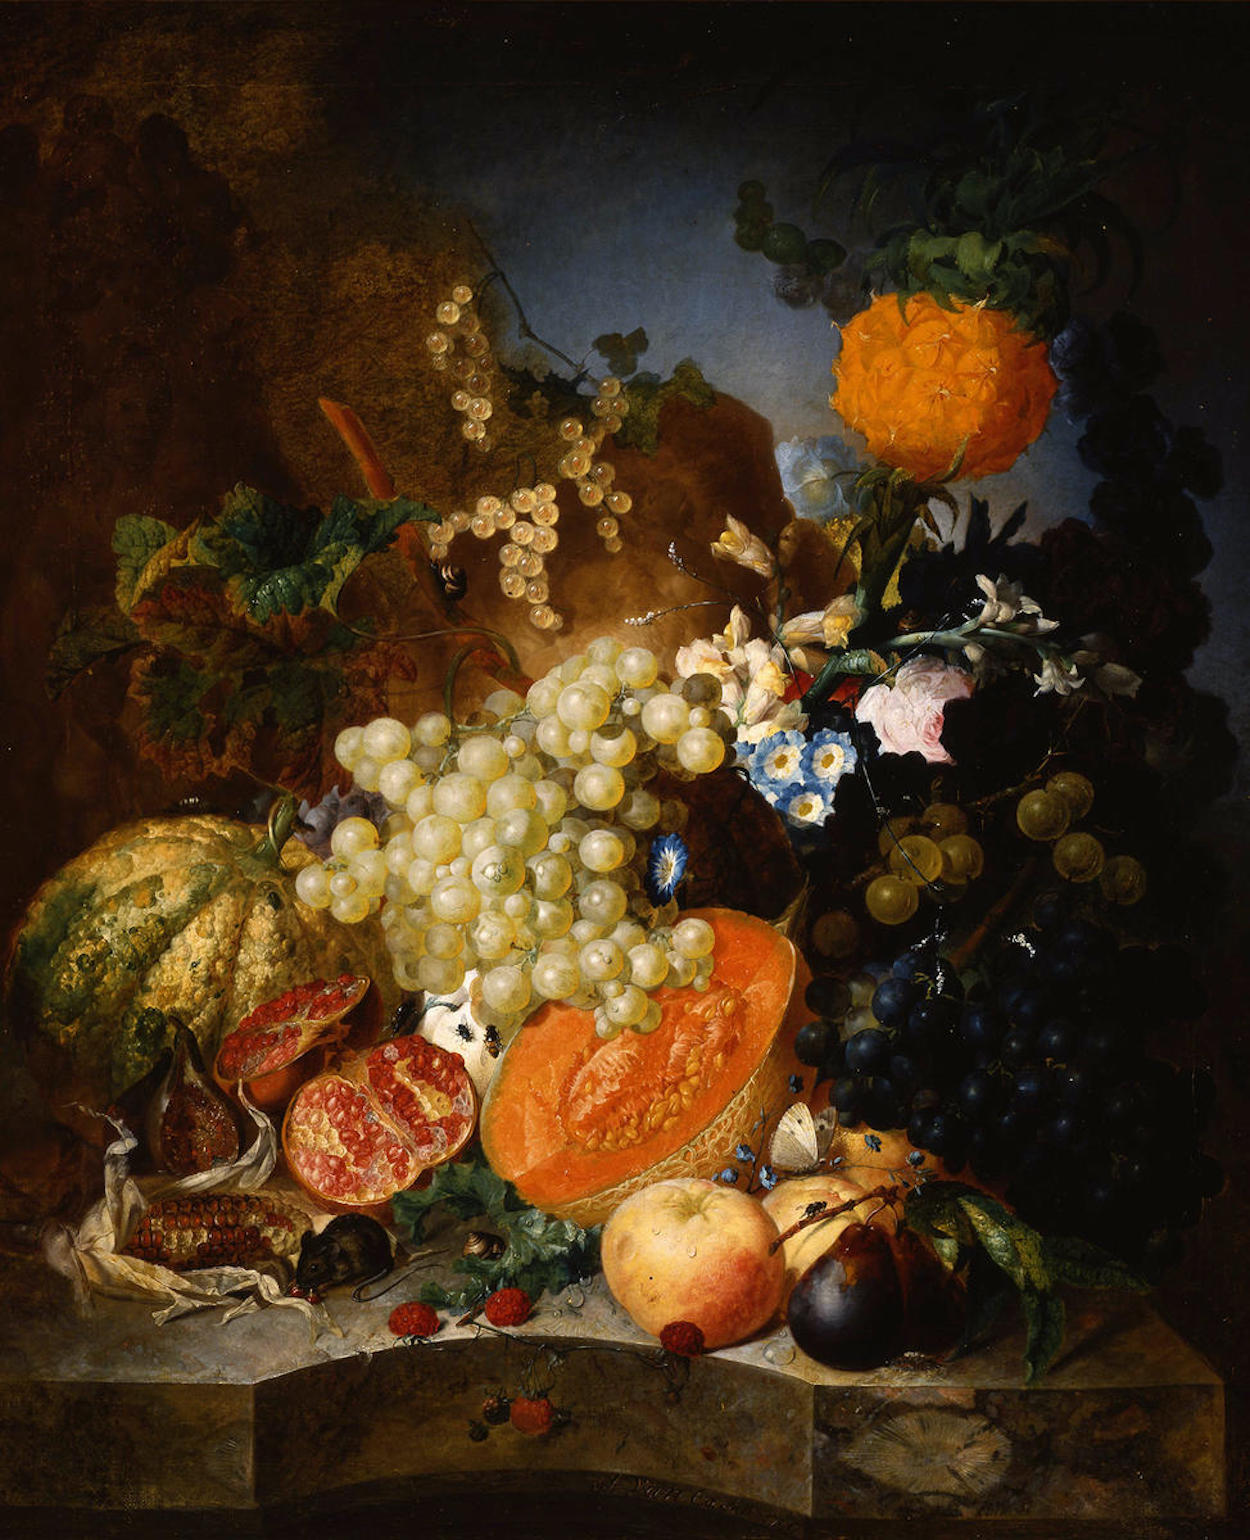 Still Life with Fruit by Jan van Os - 1769 - 69.9 x 57.8 cm The Frick Pittsburgh